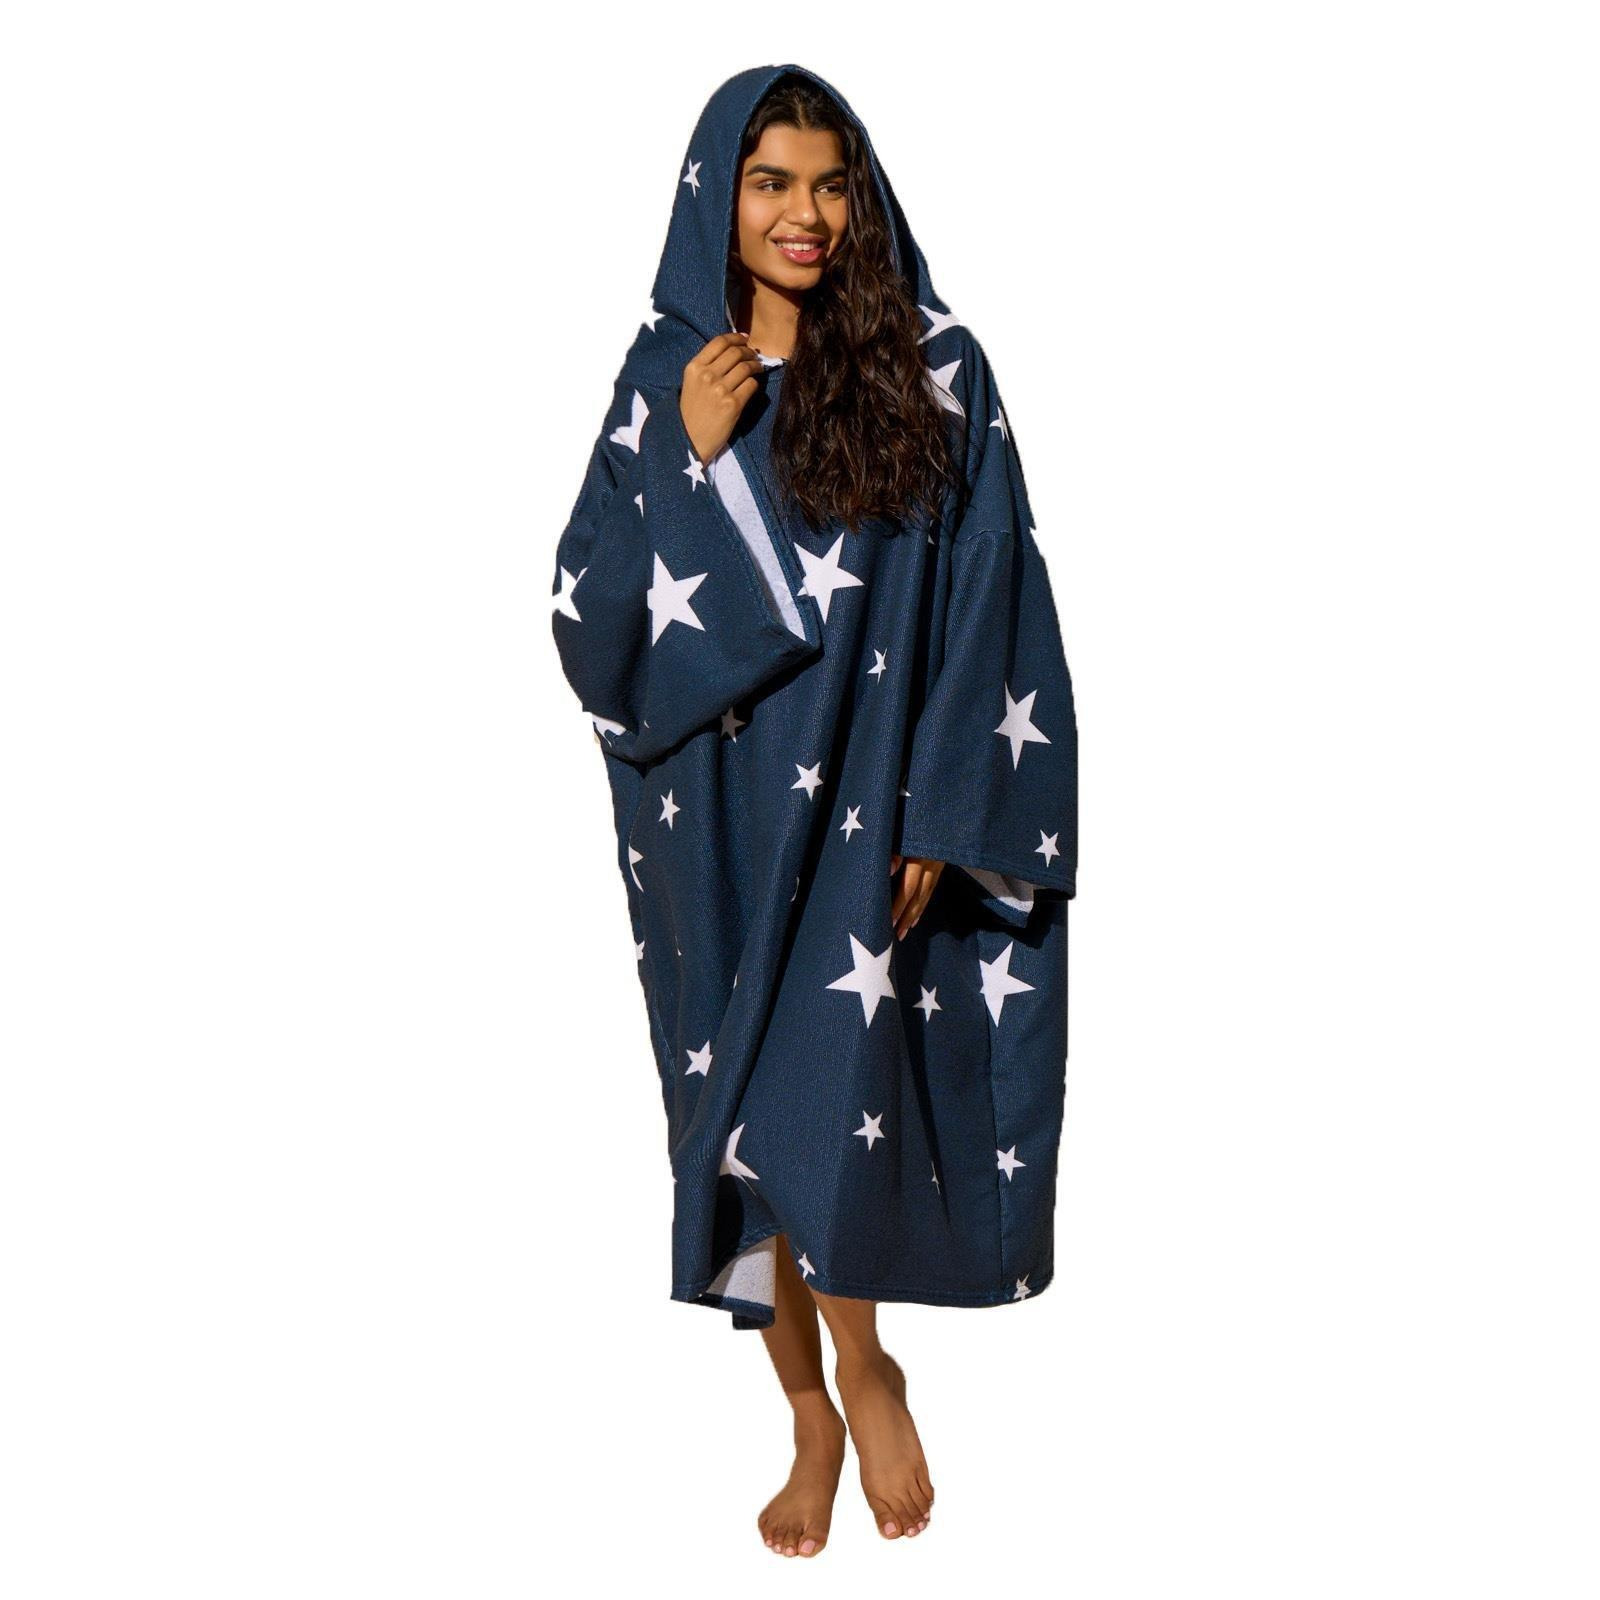 Star Hooded Poncho Towel Swimming Adult Dry Changing Robe Beach Bath - image 1